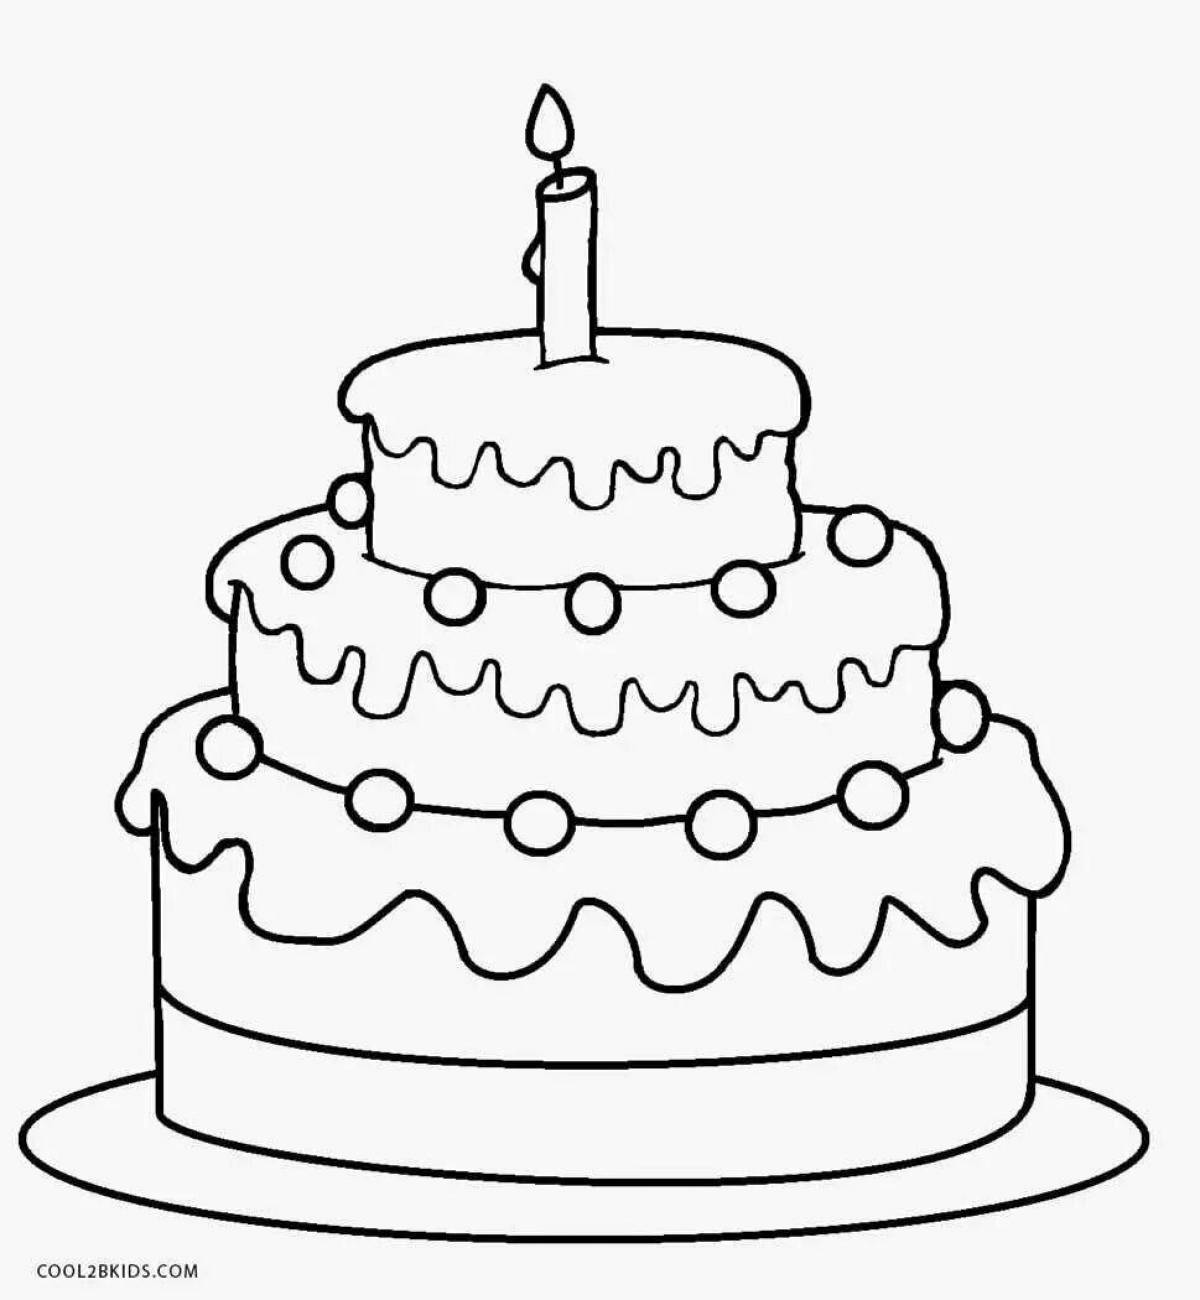 Awesome beautiful cake coloring page